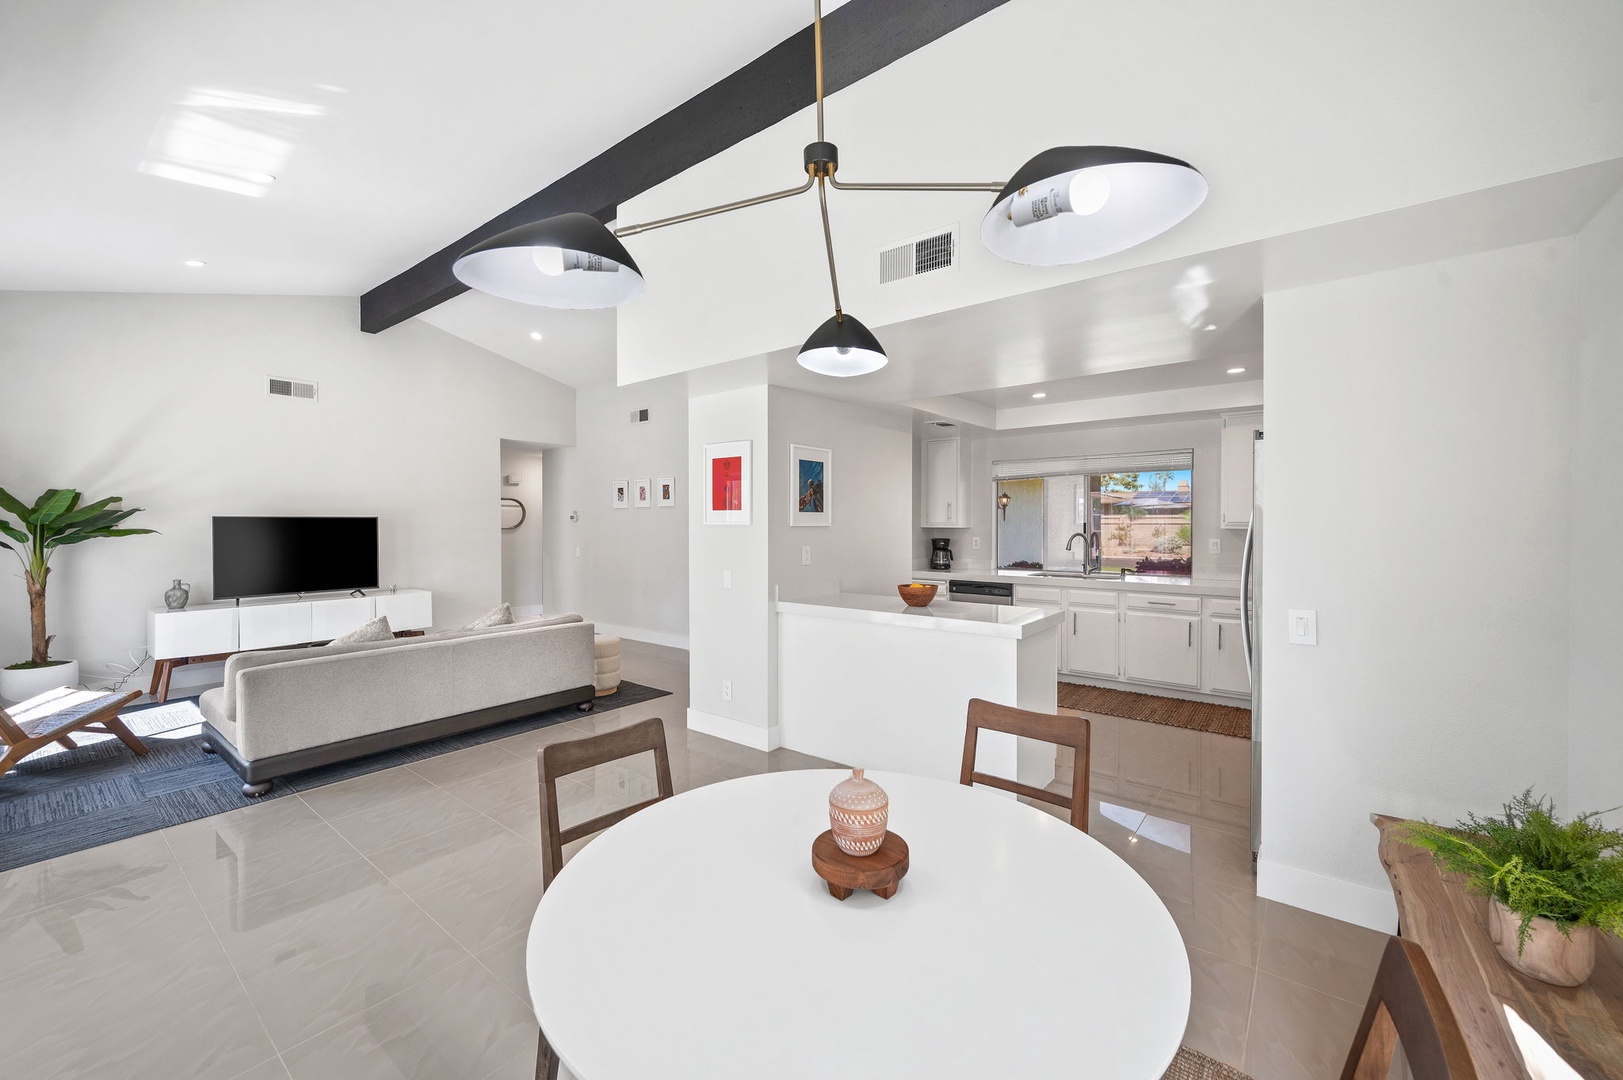 The dining area flows smoothly into the streamlined kitchen